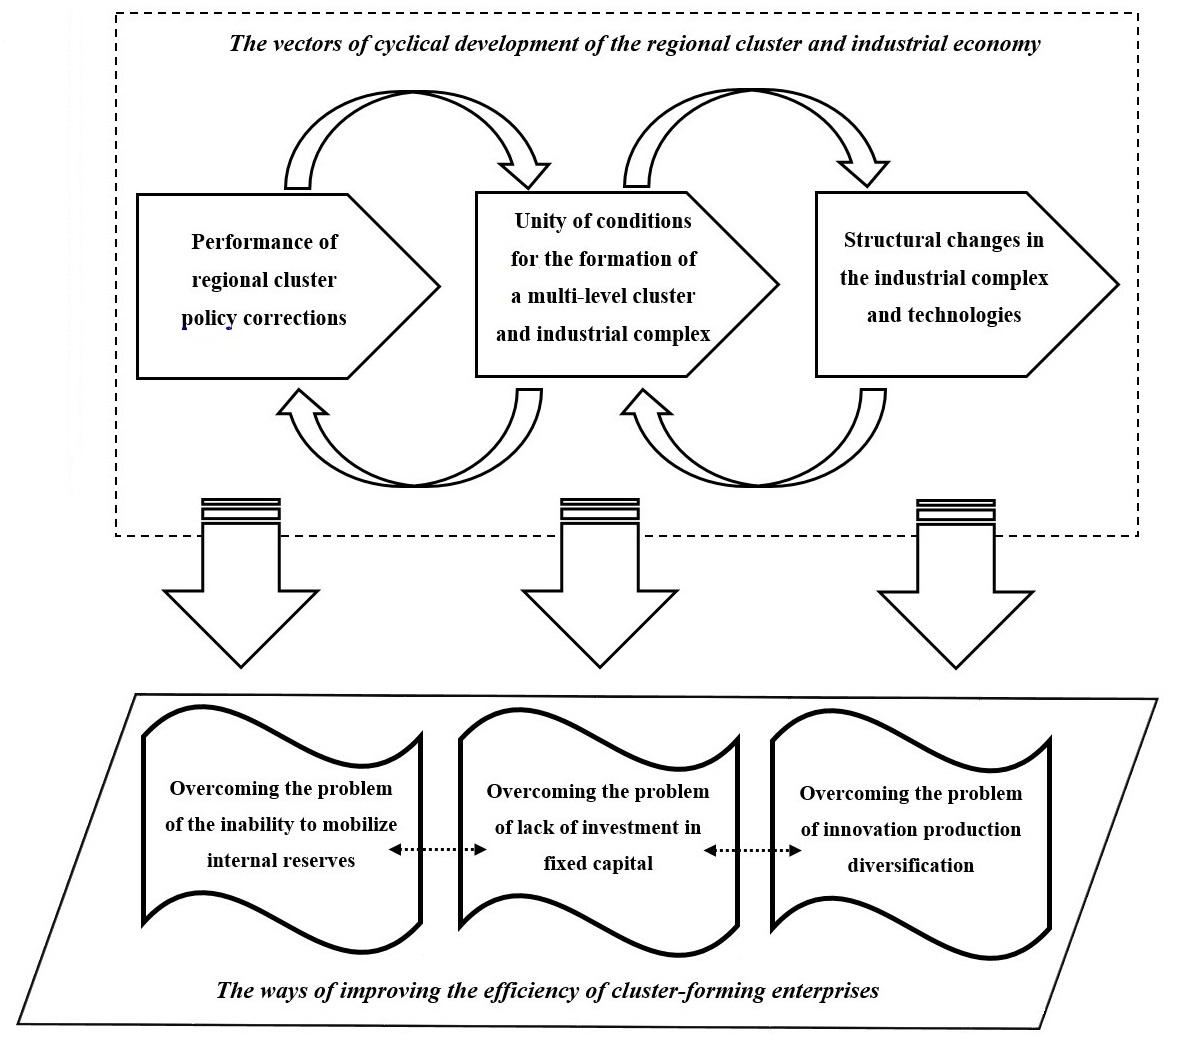  Integration model of balanced scorecard parameters for evaluation and management of the
      economic potential efficiency of cluster-forming enterprises and the production cluster